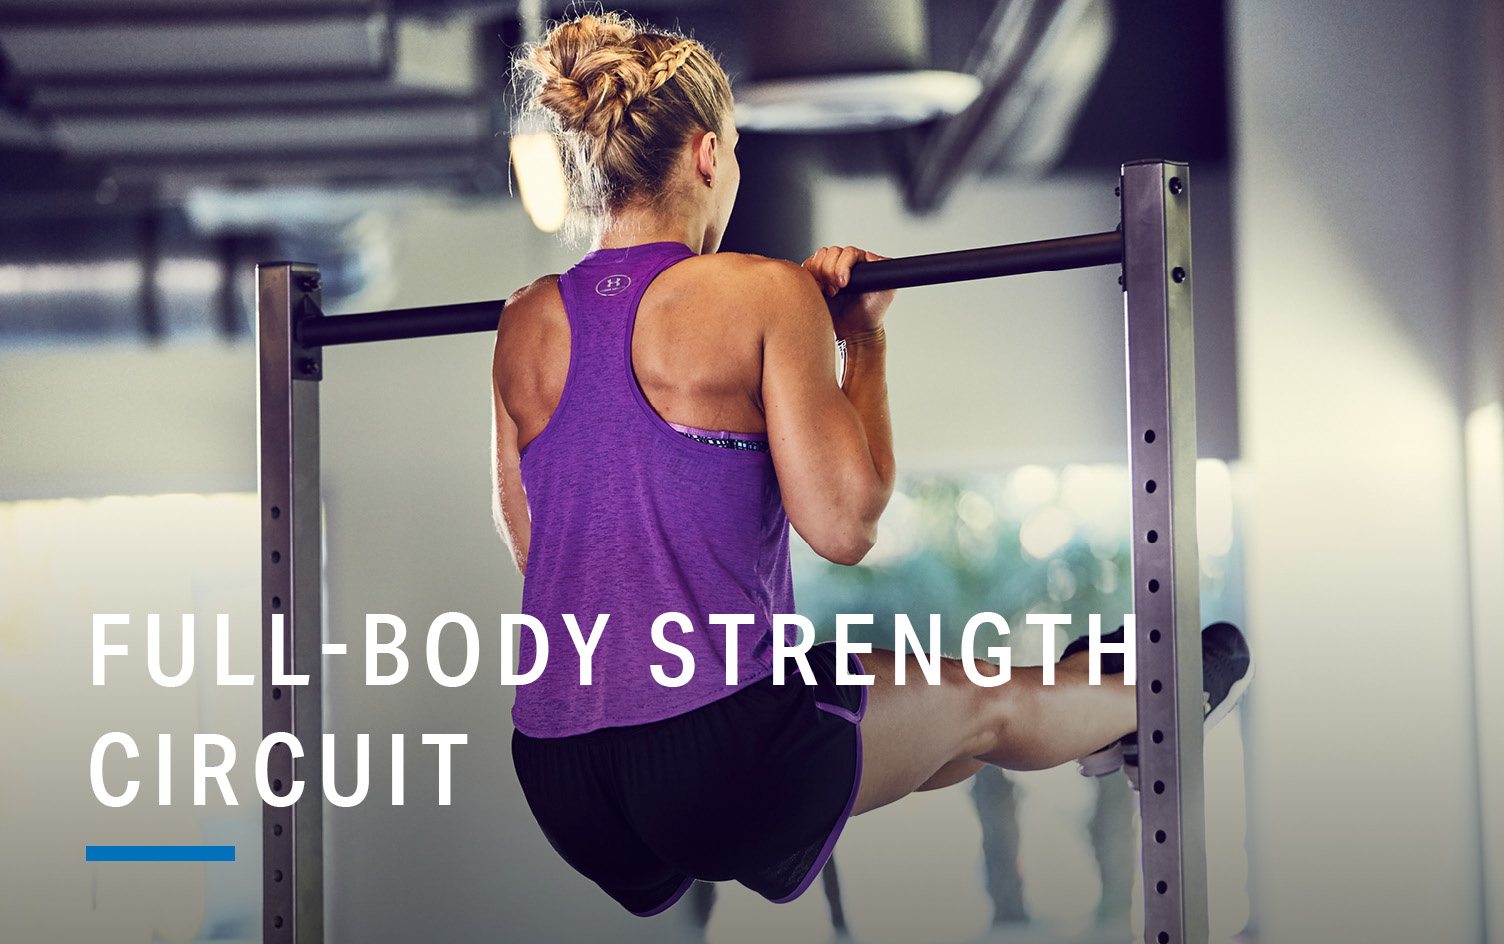 30 Minute Full-Body Strength Training Workout for the Gym